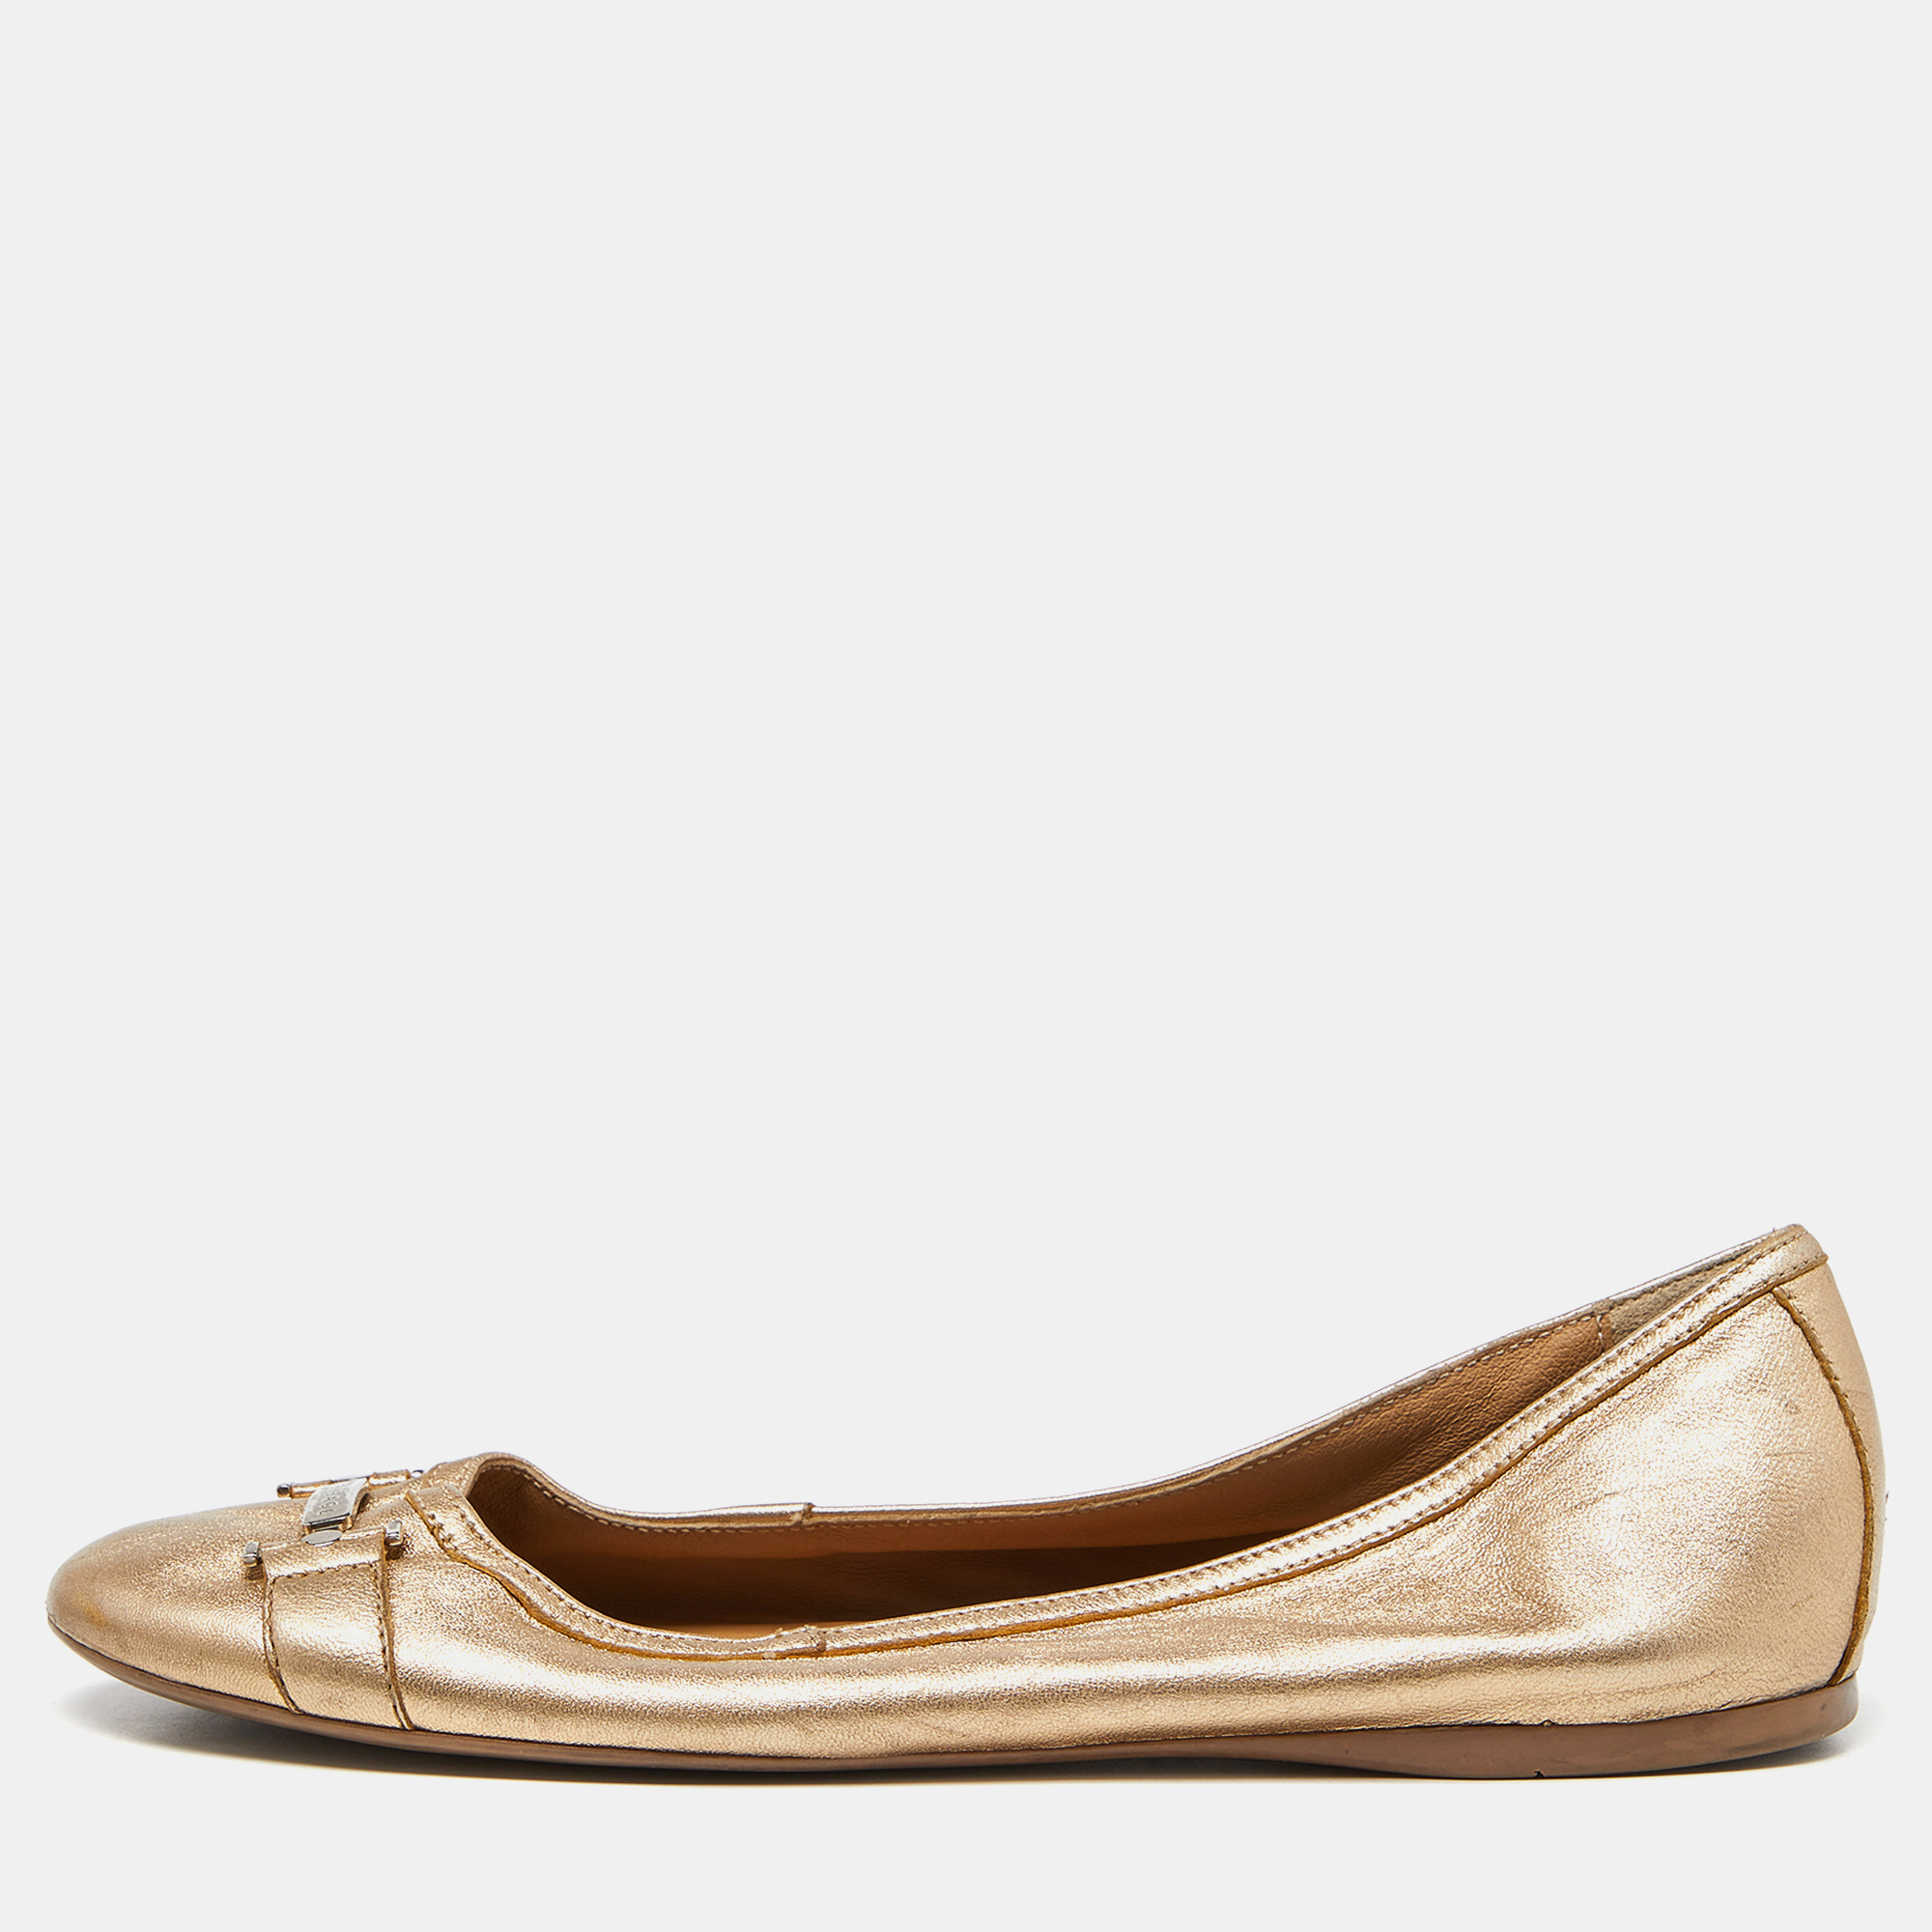 Versace gold leather ballet flats size 37